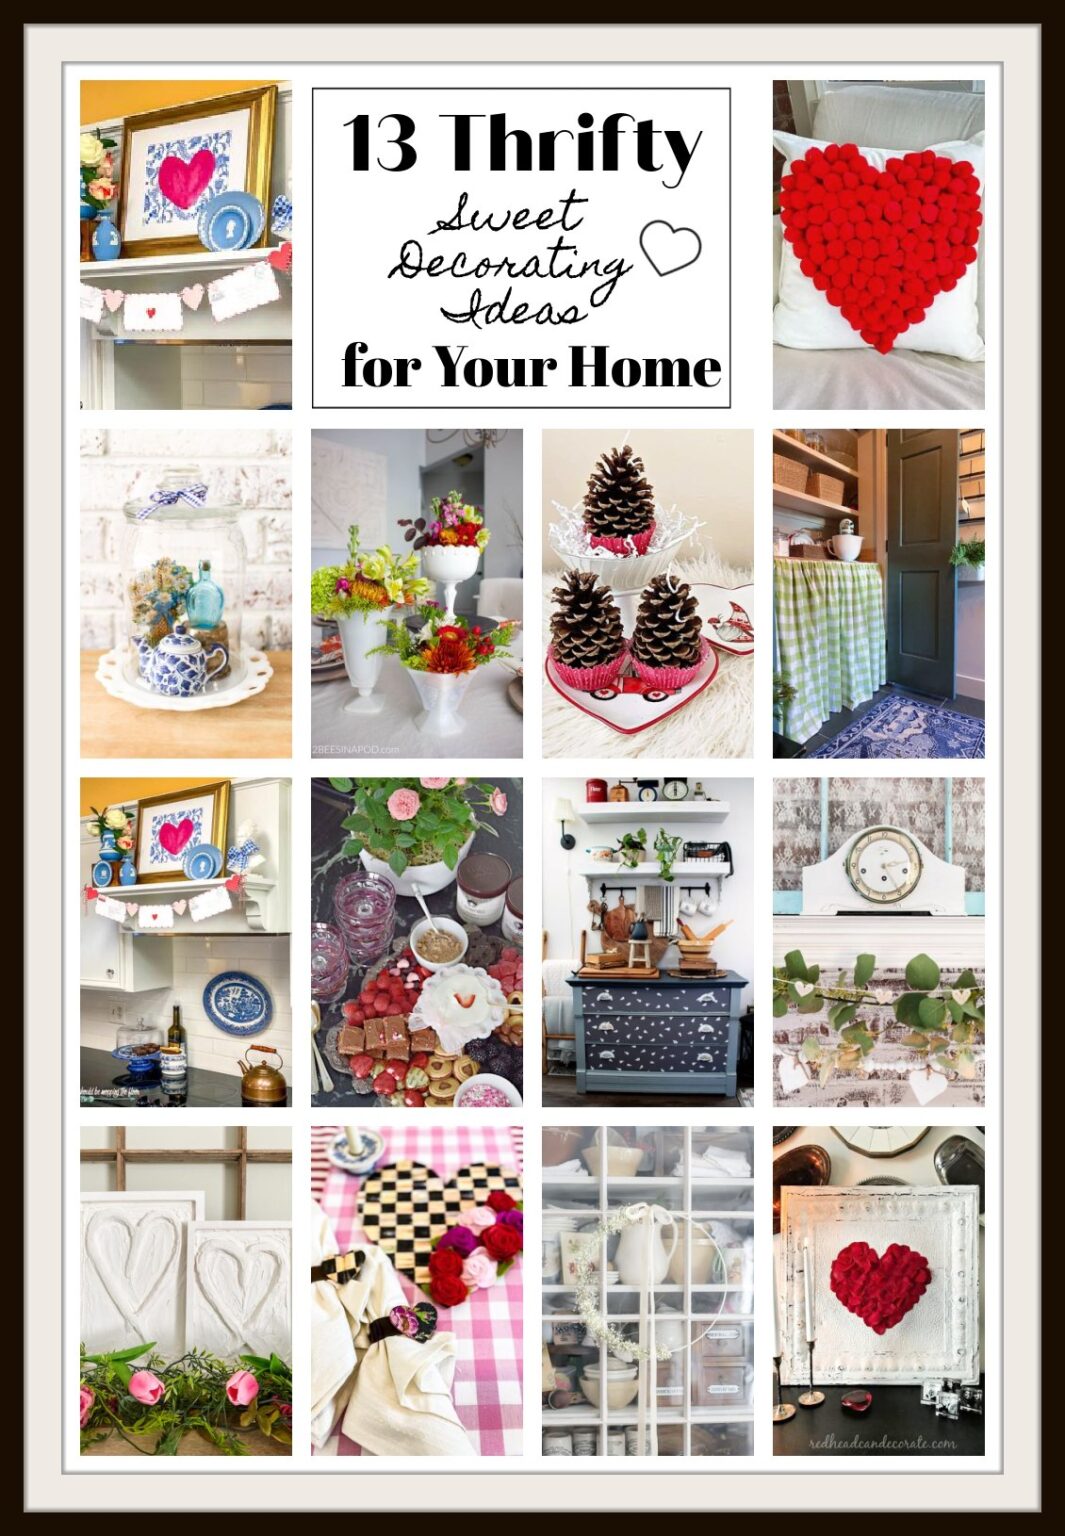 3 Thrifty Sweet Decorating Ideas for Your Home